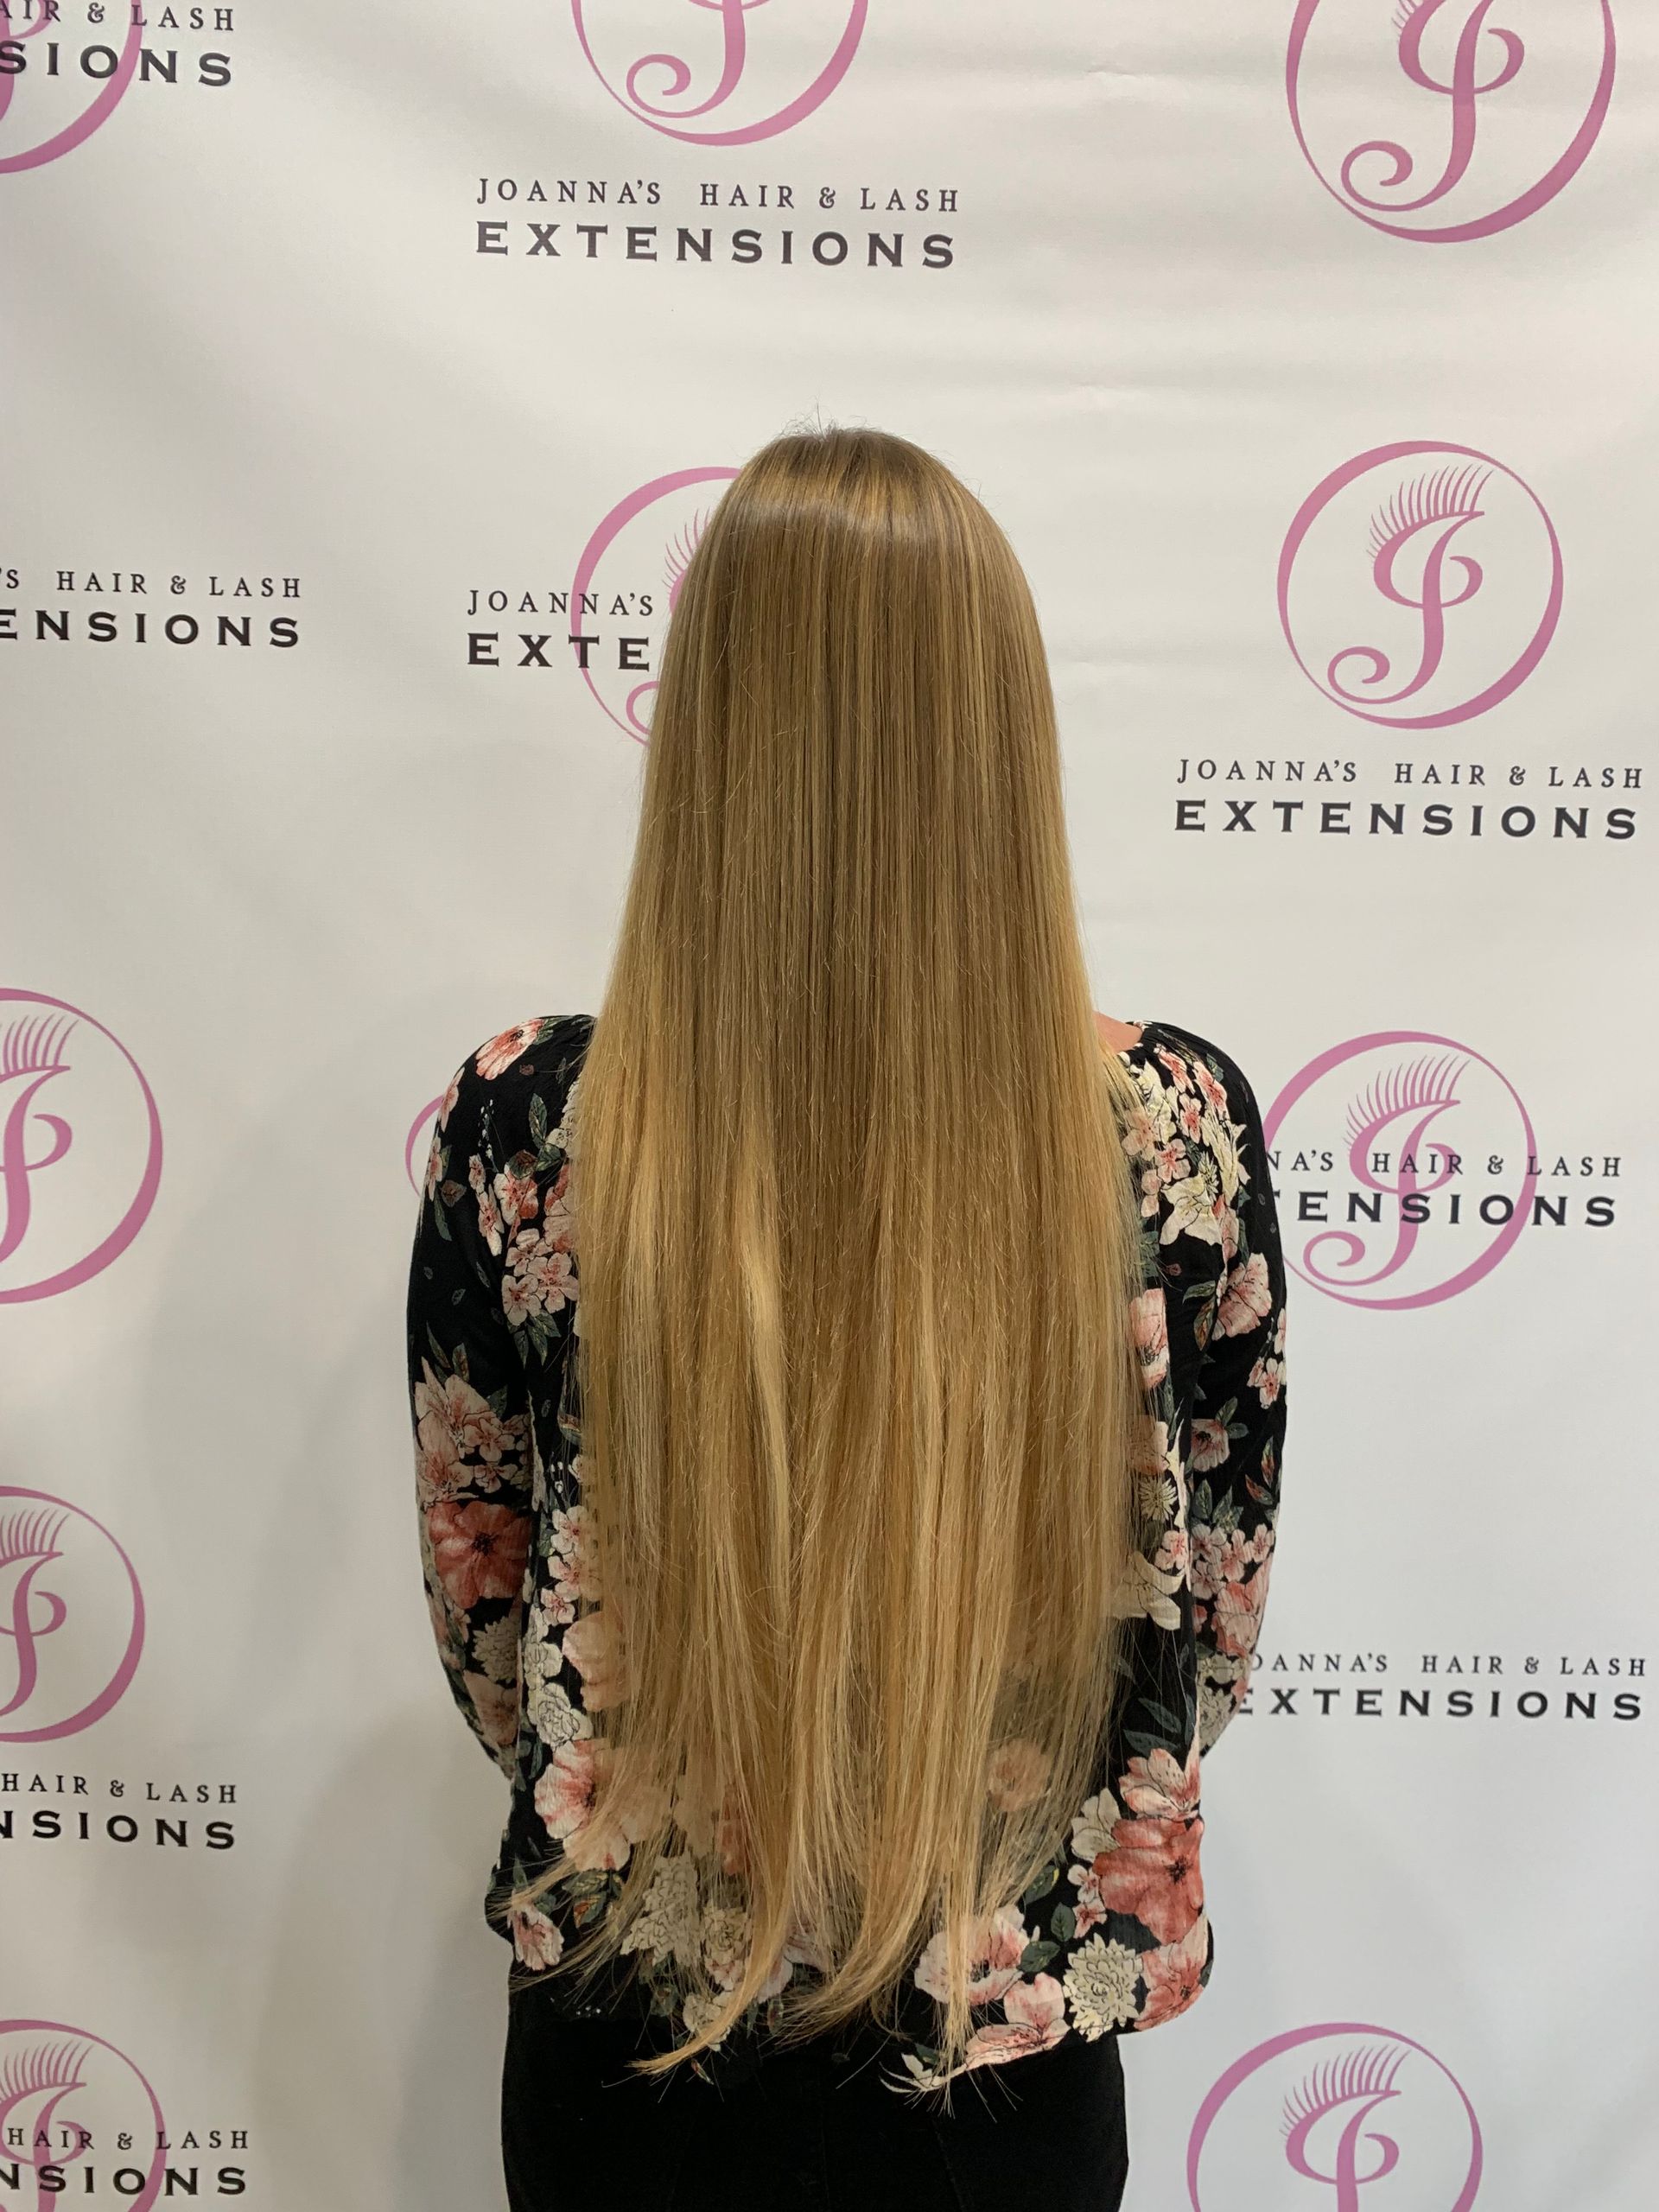 a woman with long blonde hair is standing in front of a sign that says extensions